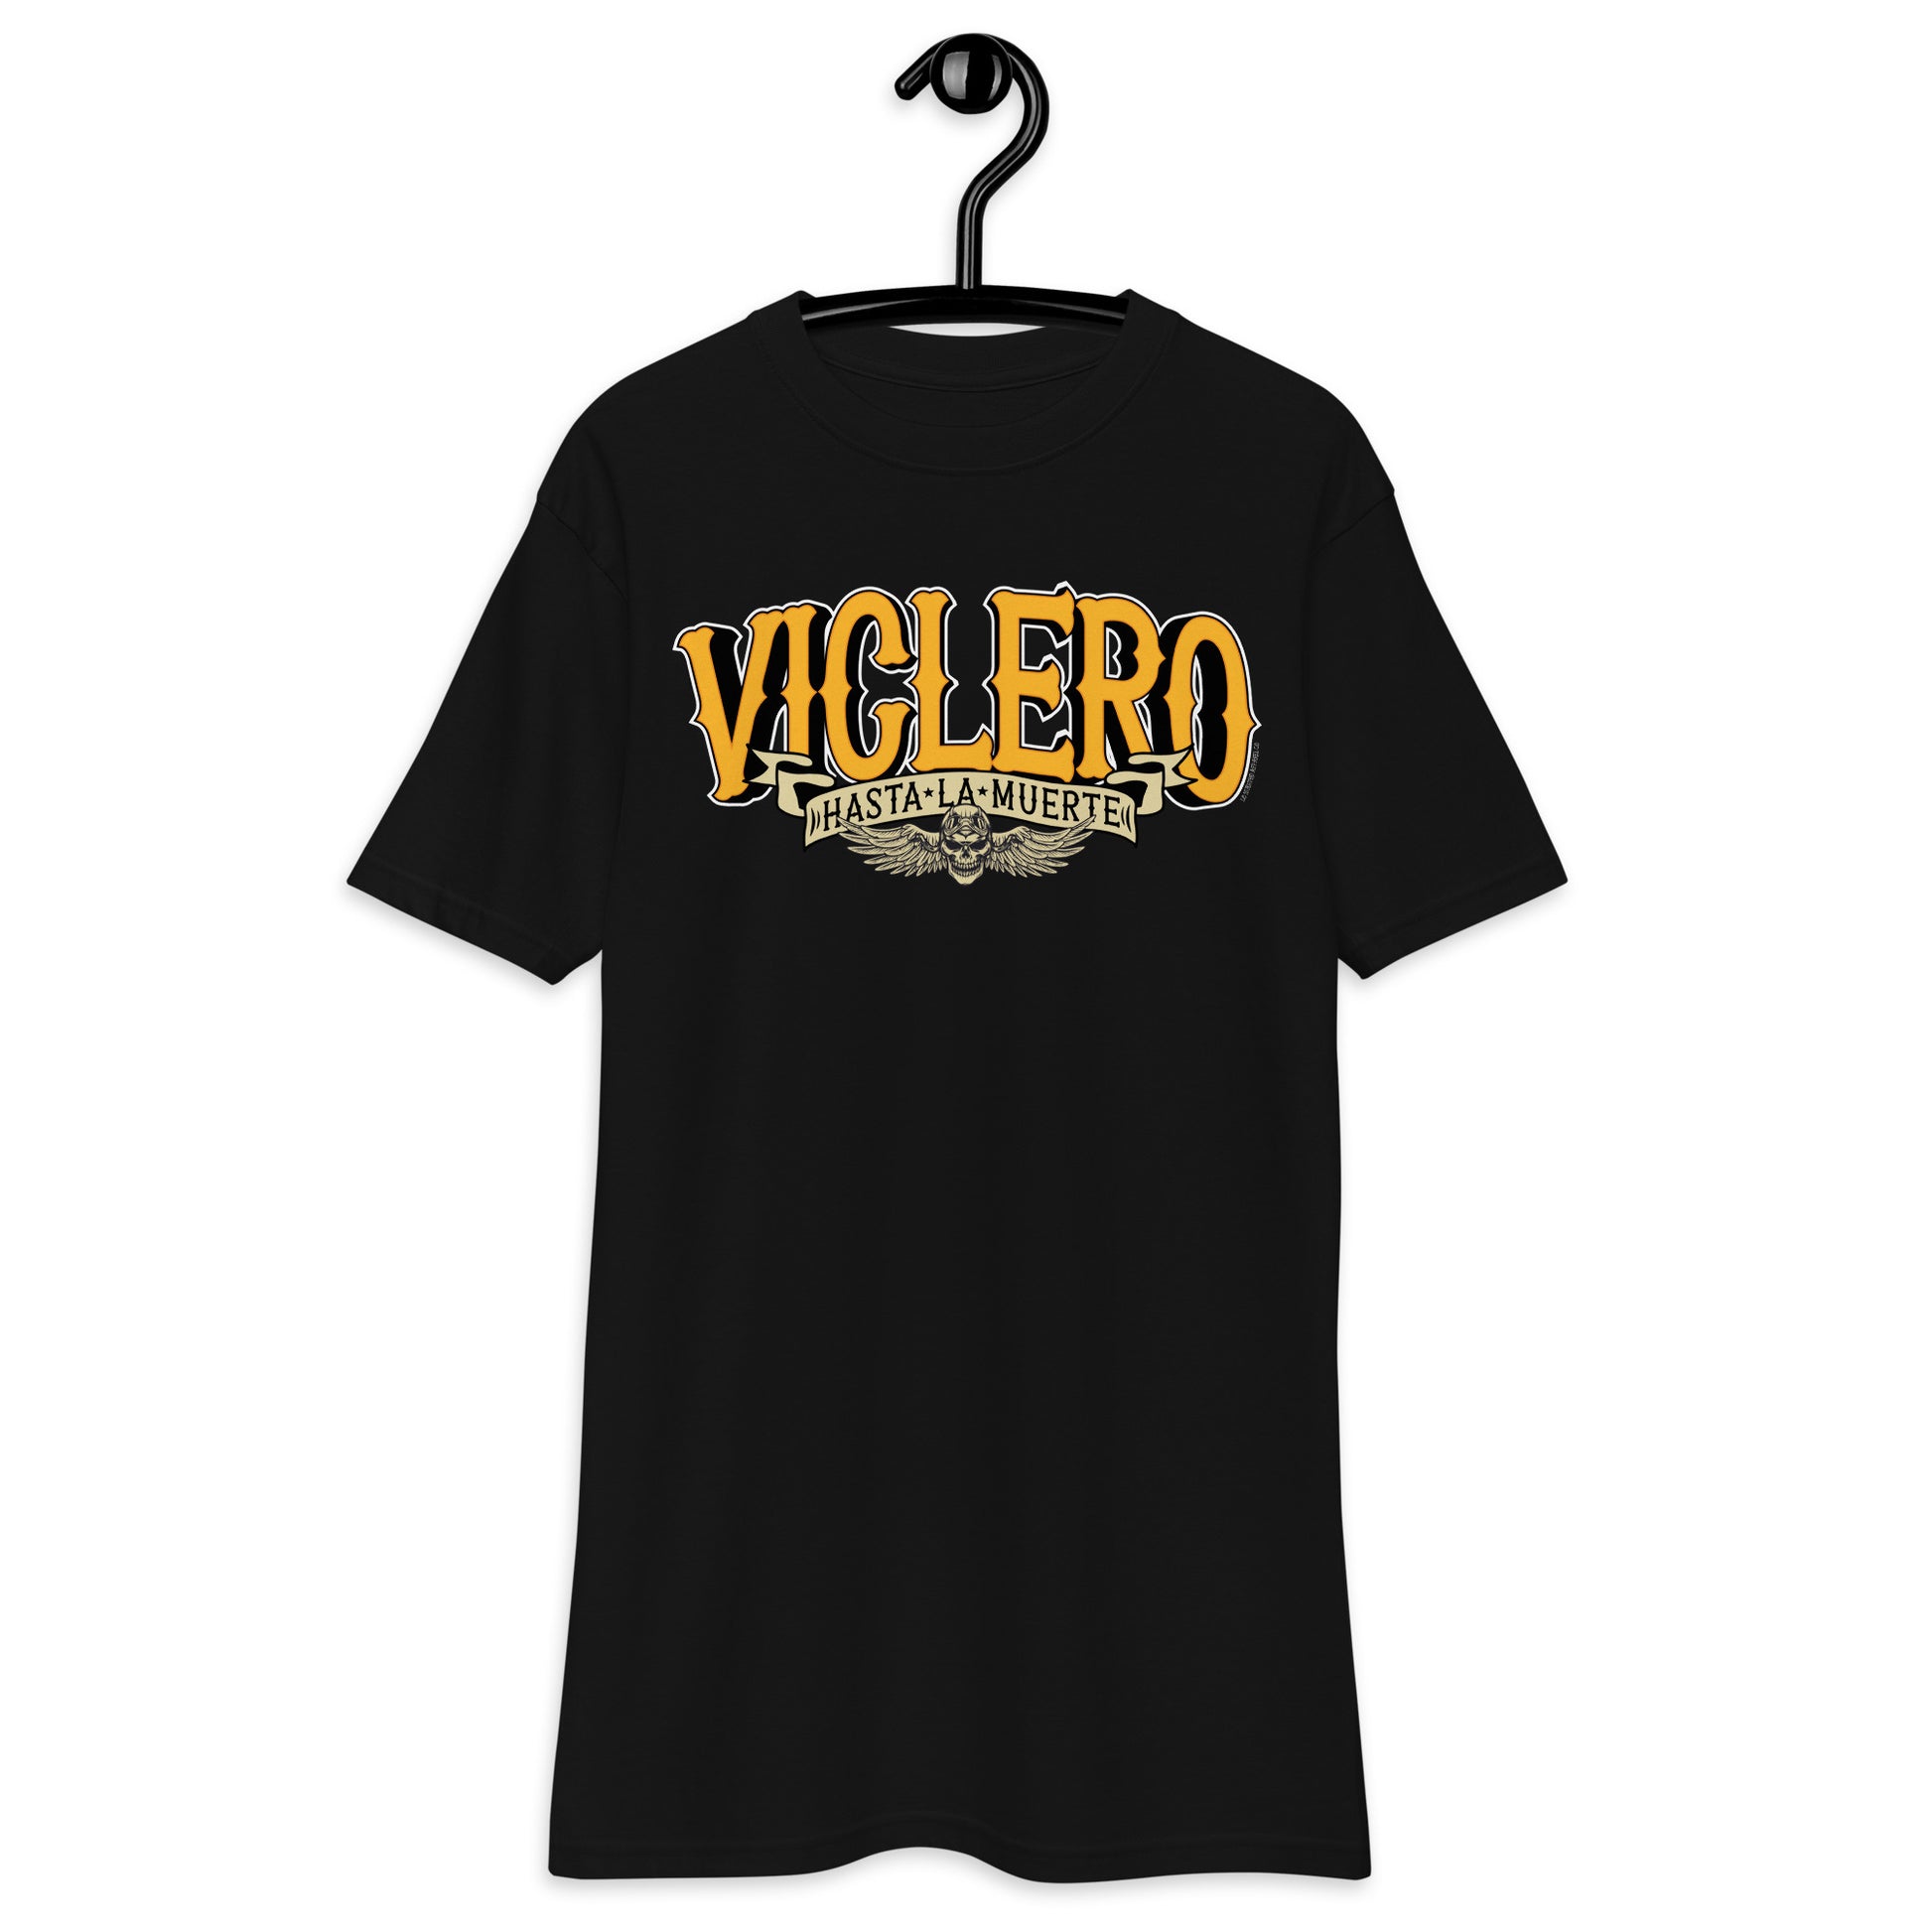 Relaxed fit "Viclero Hasta La Muerte" T-shirt